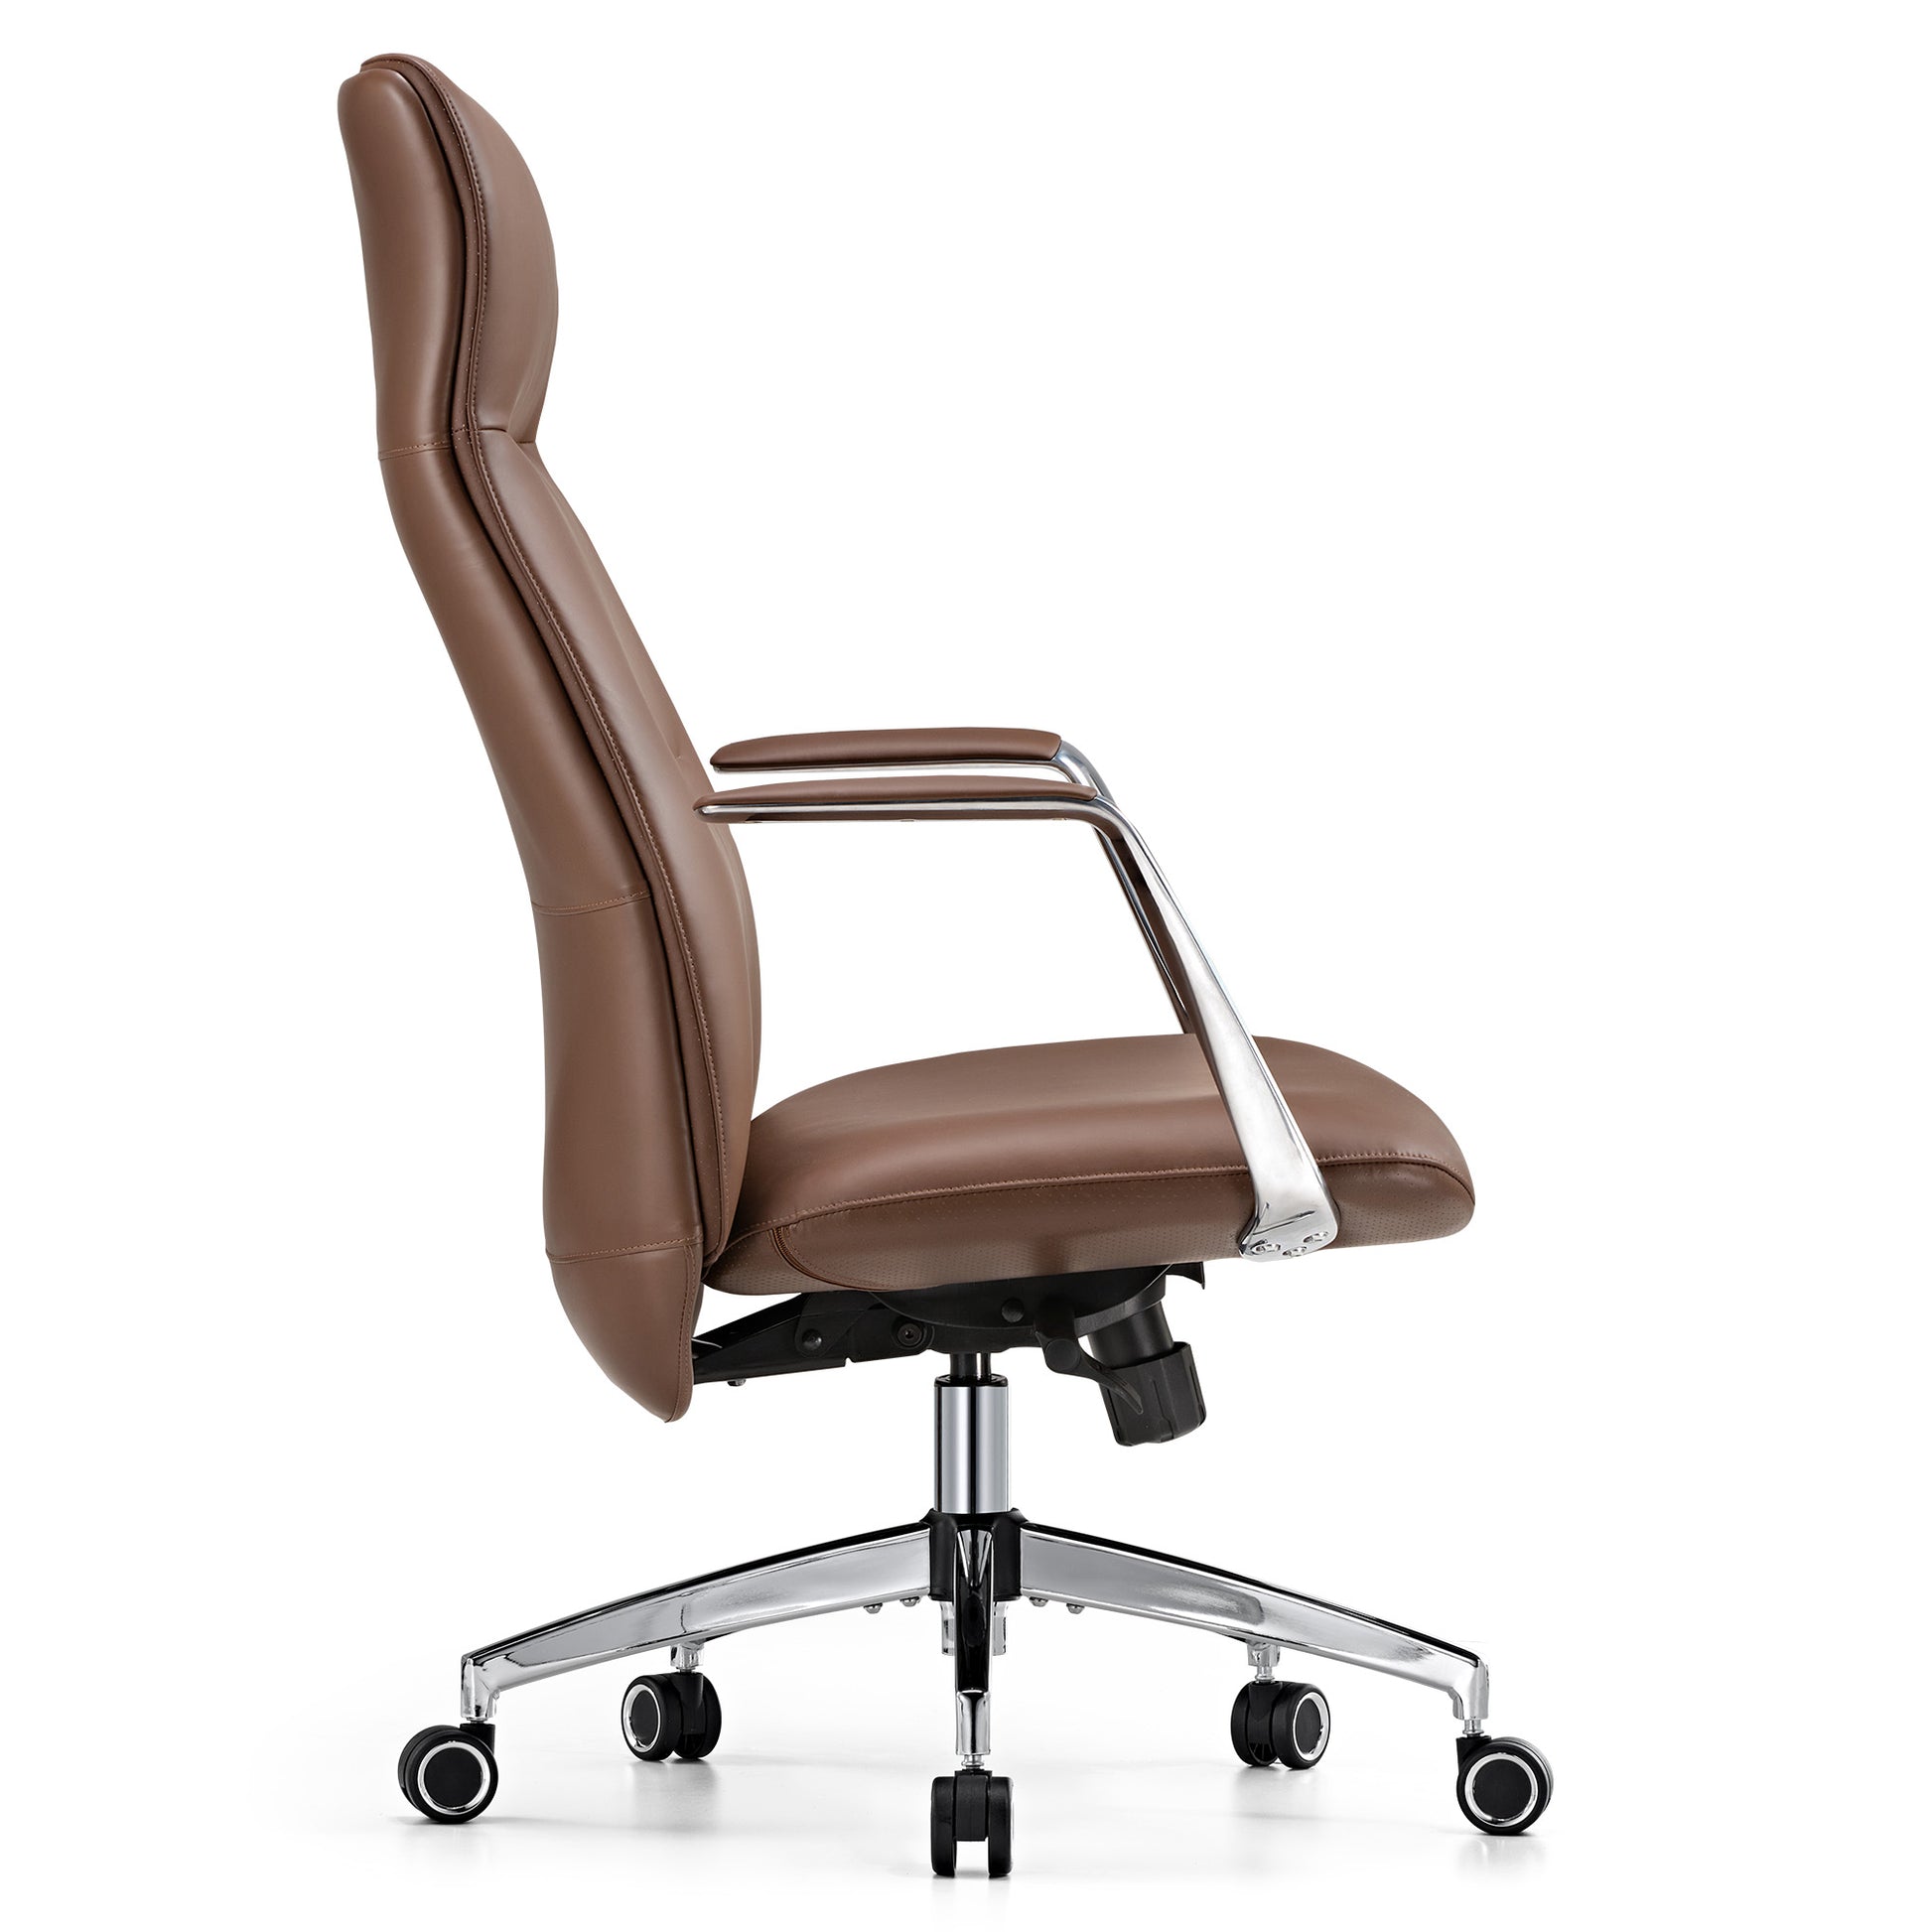 Royal Slim OC08 Leather High Back Executive Office Chair, Brown High End Office Side Angle